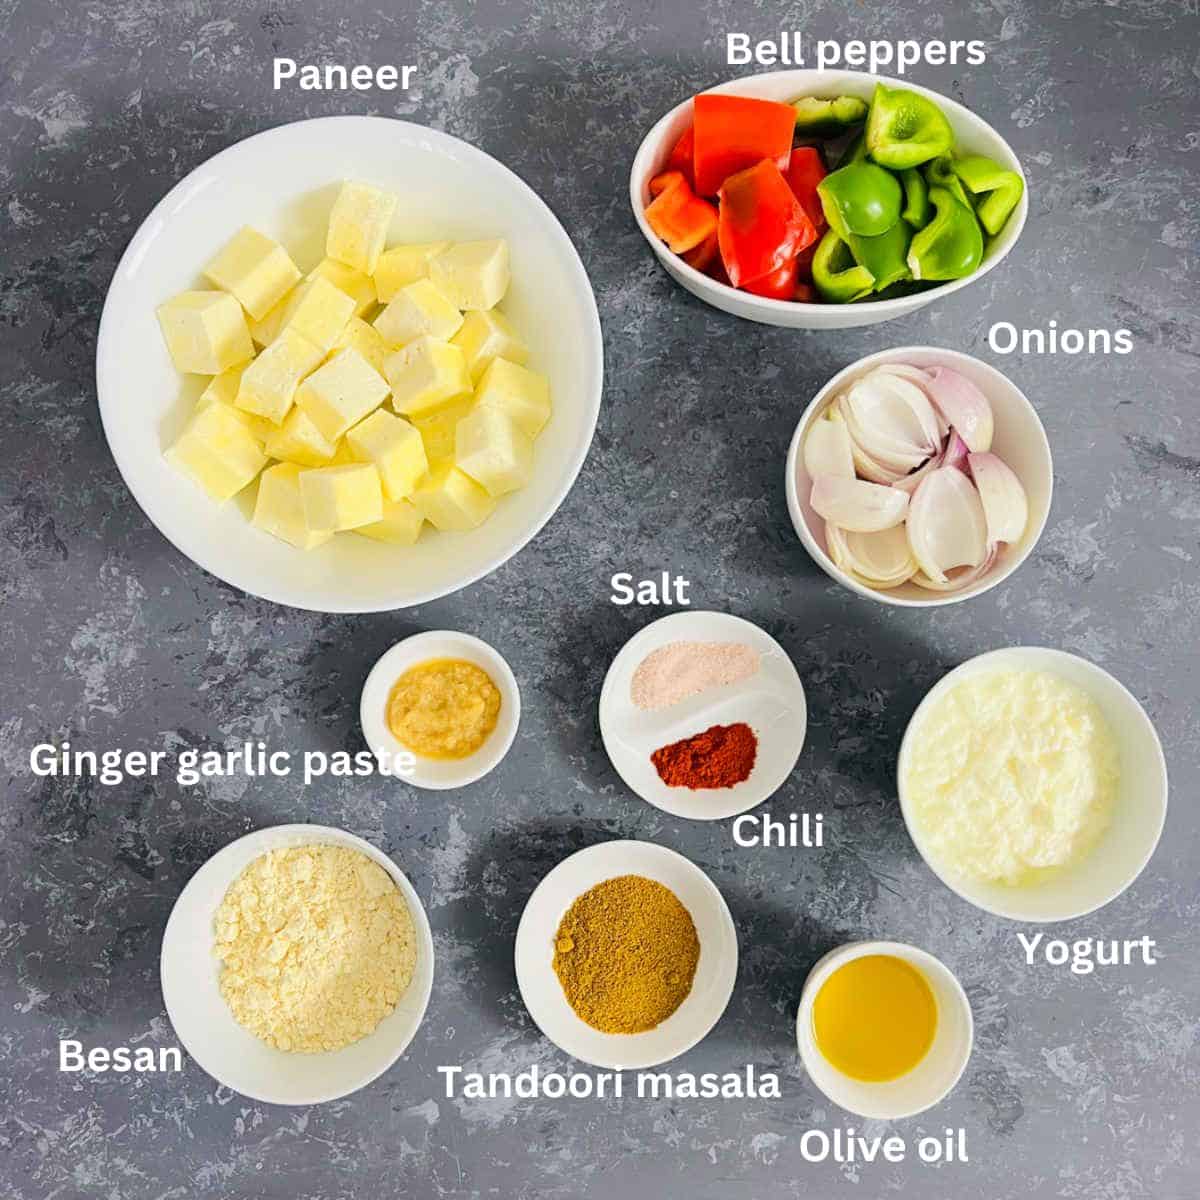 Ingredients needed to make paneer tikka placed on a grey surface.